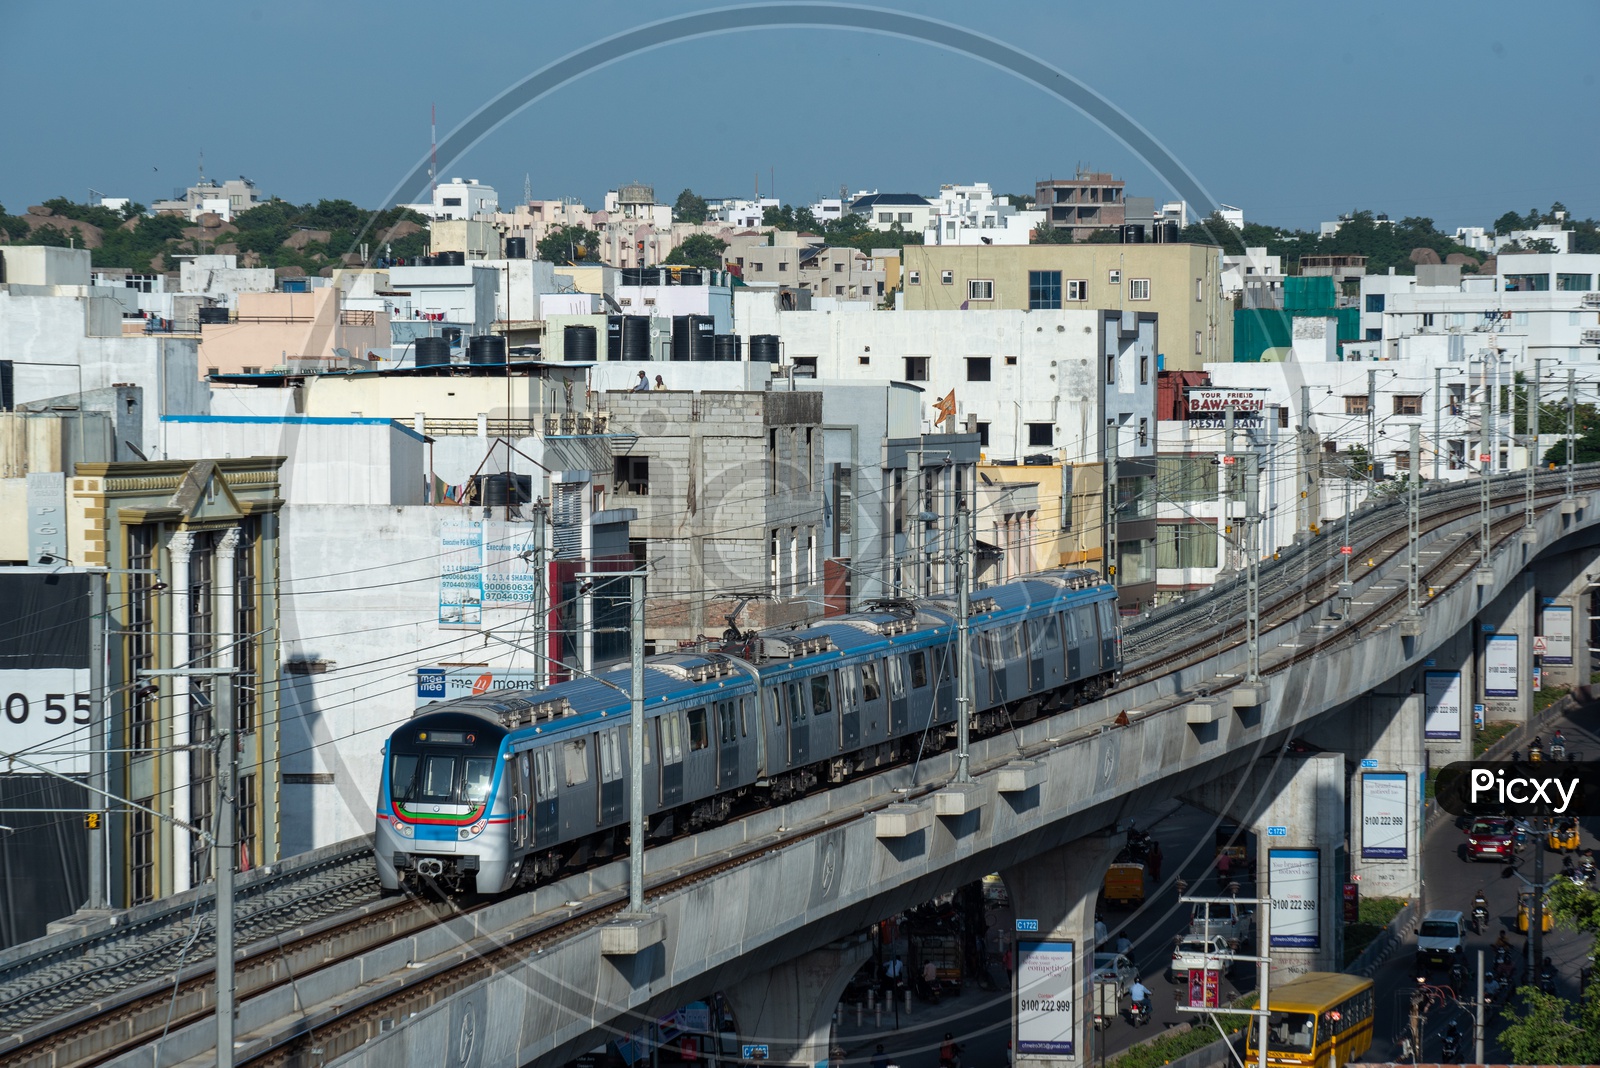 Metro train Running On Track With City scape In Background